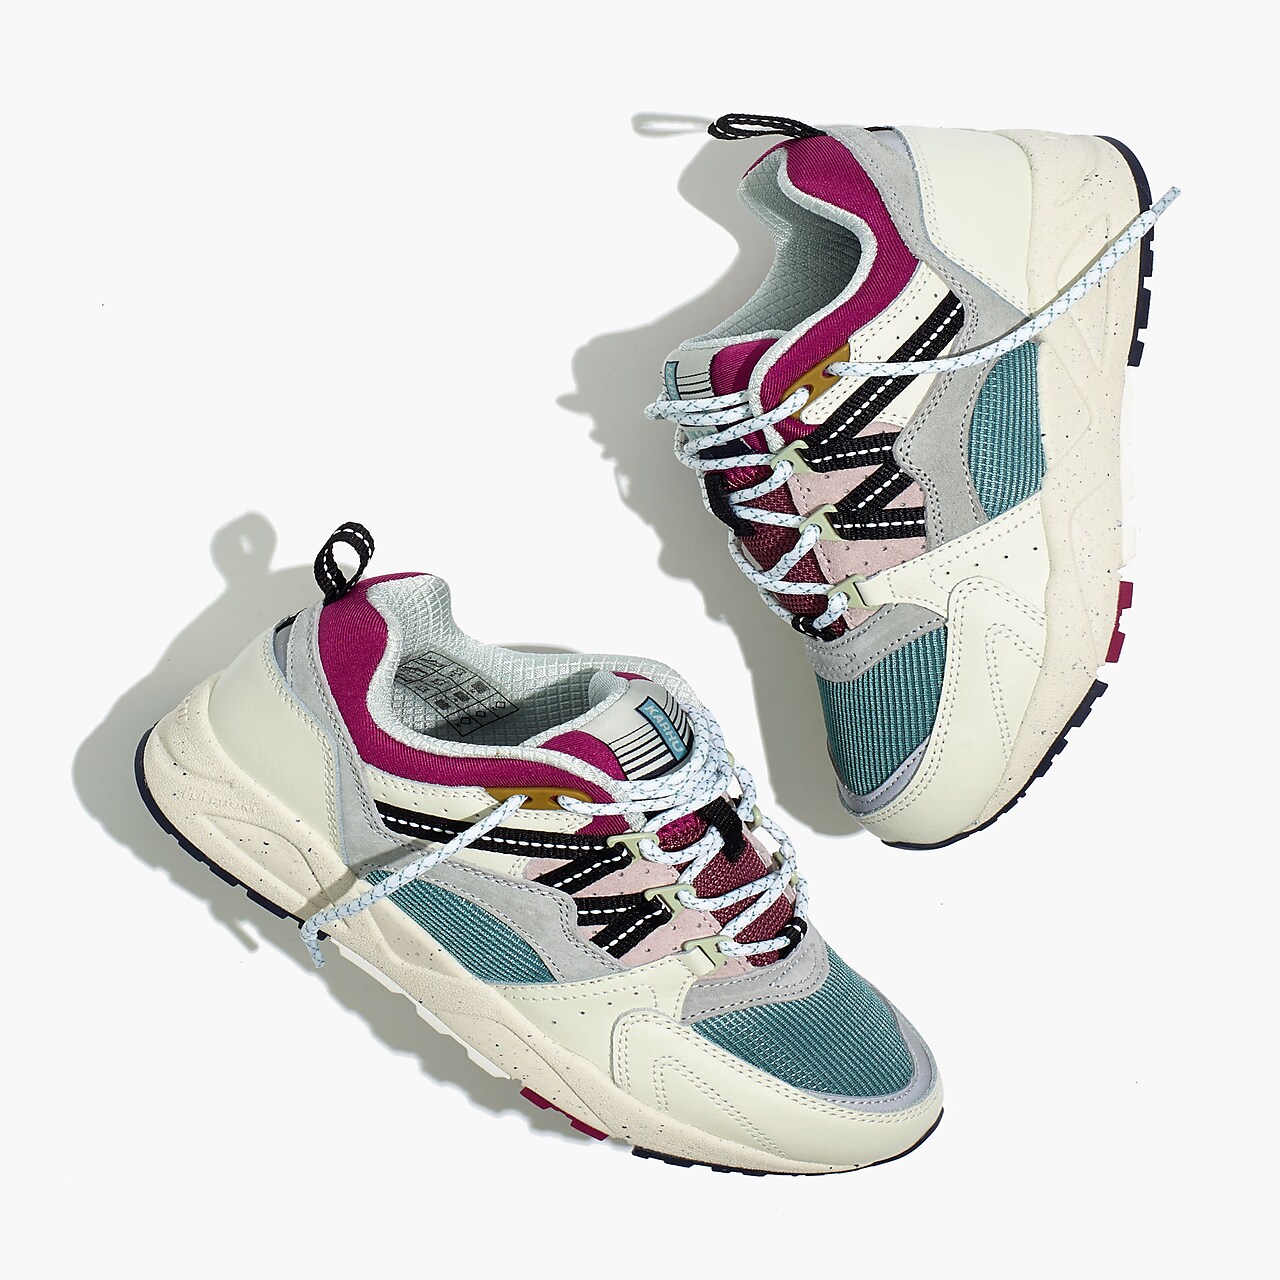 Mw Karhu Unisex Suede Fusion 2.0 Lace-up Sneakers In Lily White / Gray Violet